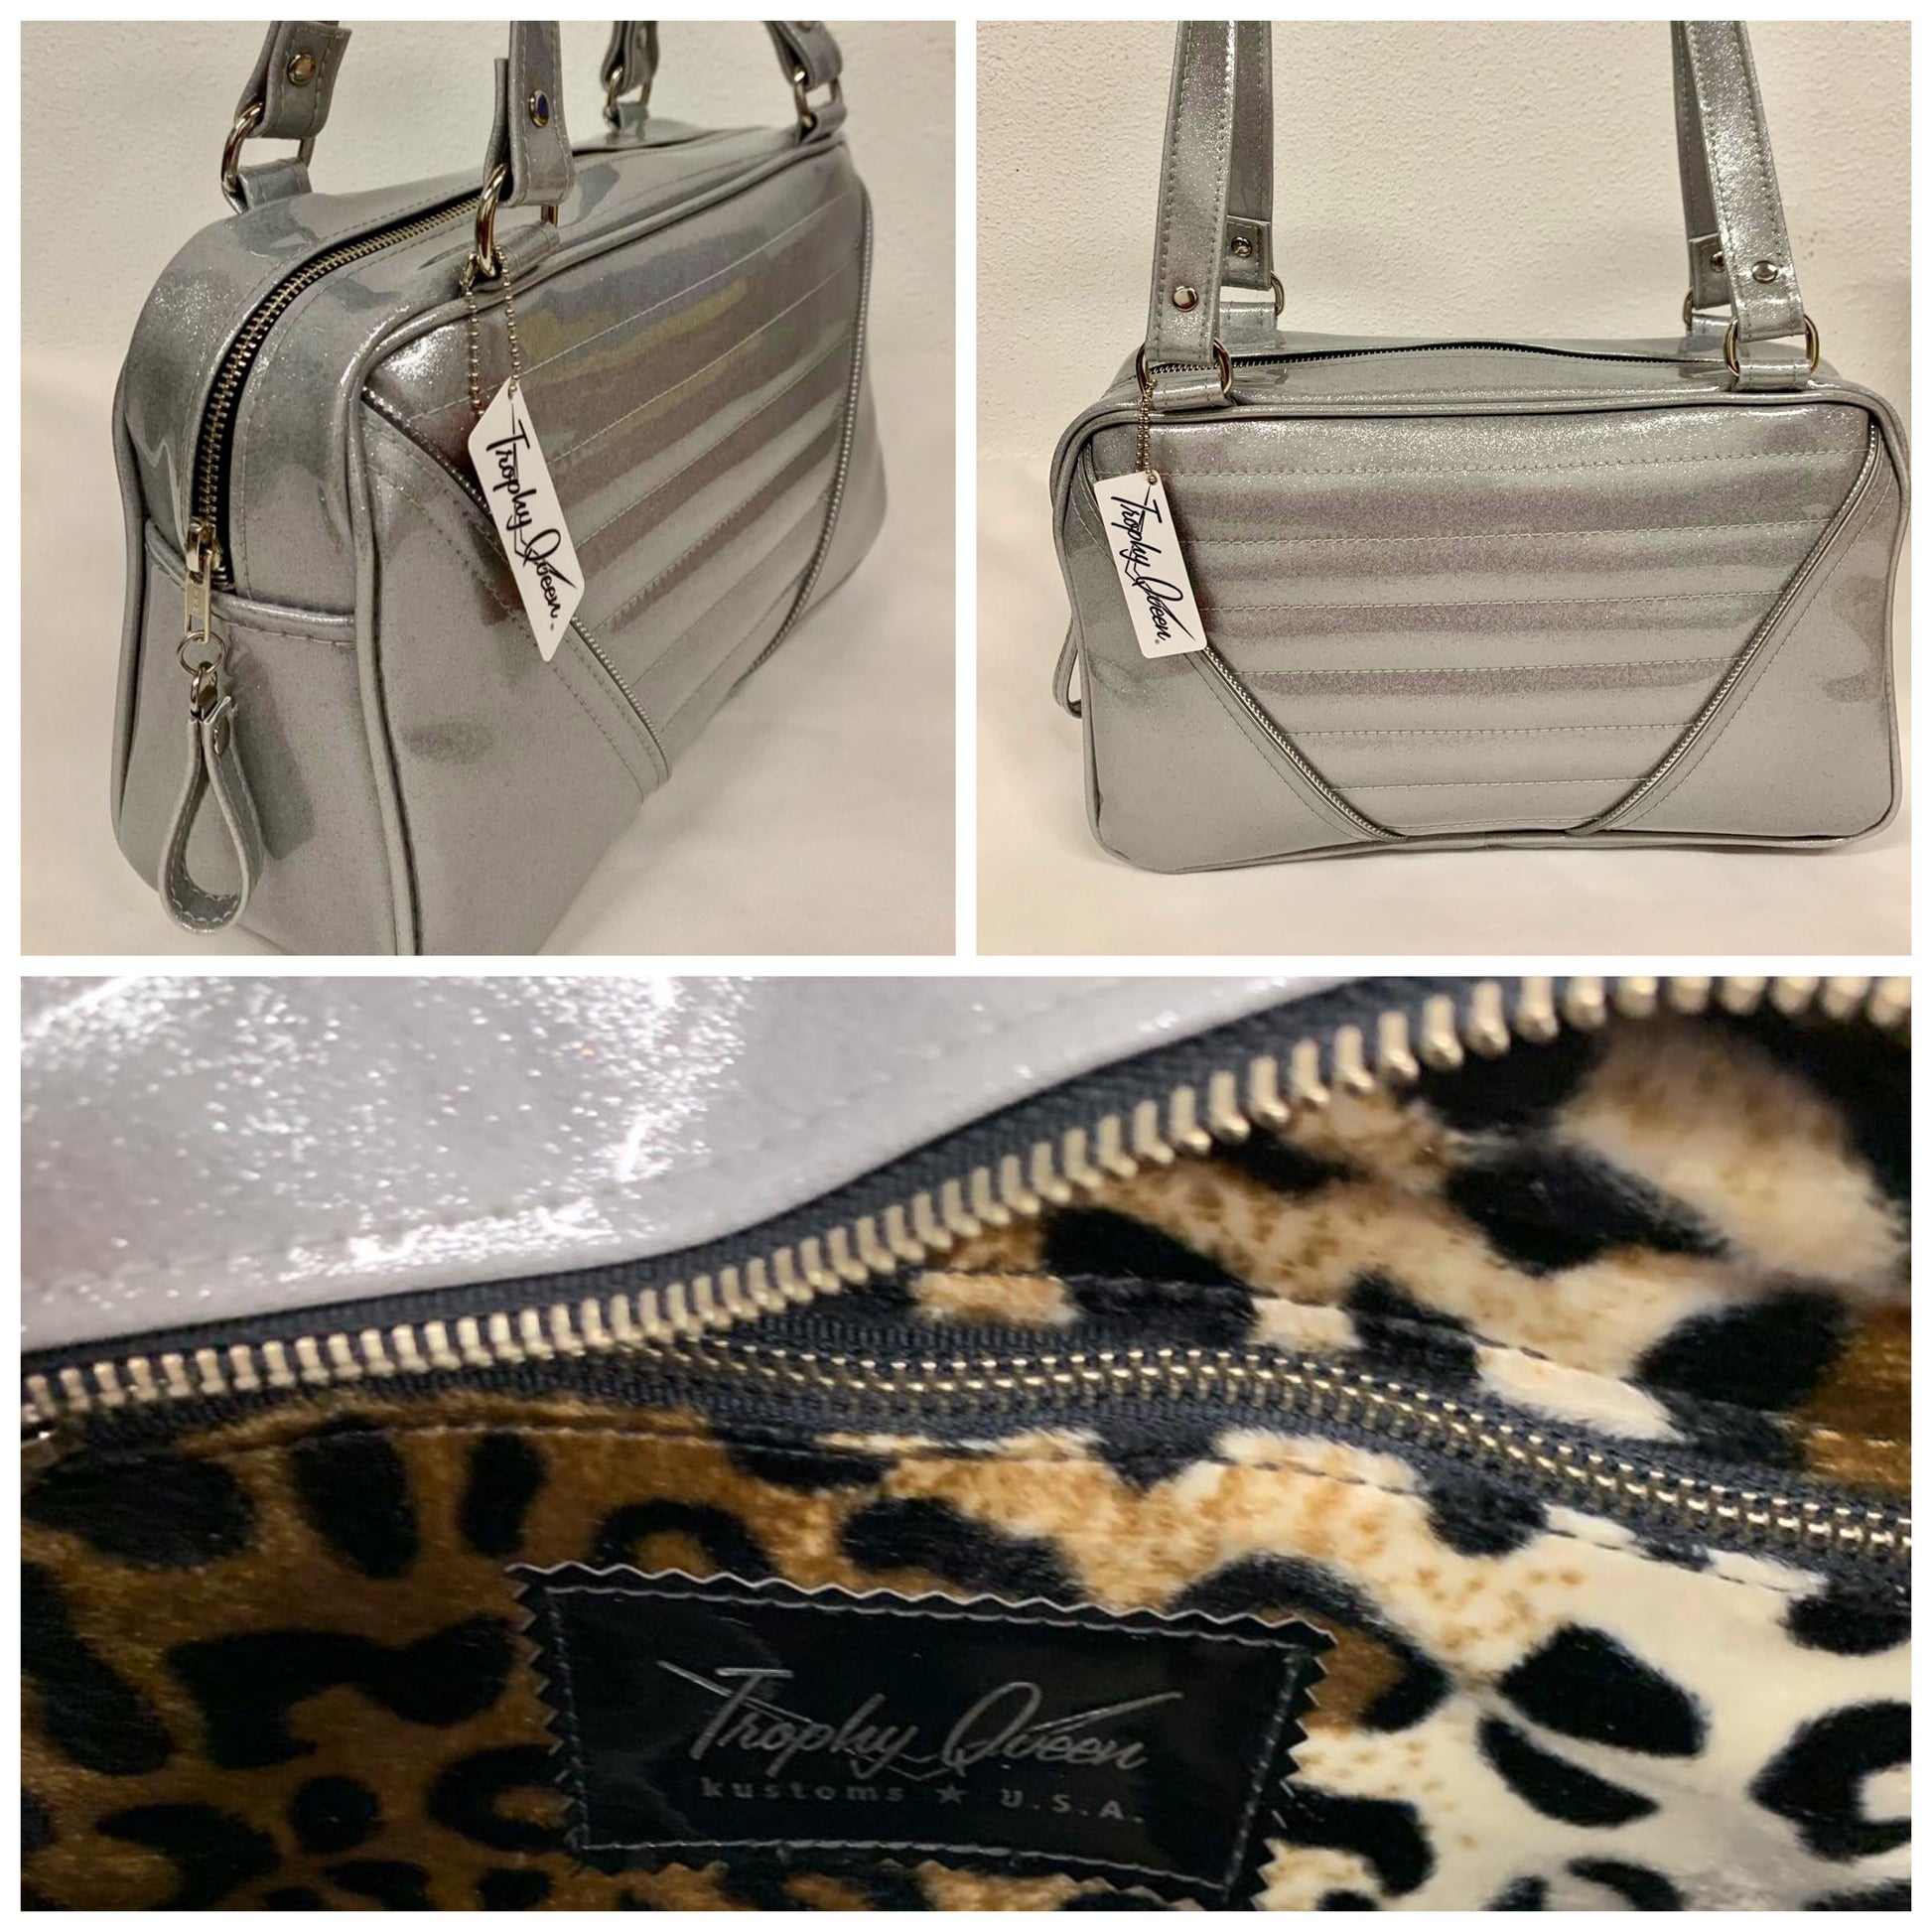 Comet Tote in chrome glitter vinyl with plush leopard lining handcrafted in California with nickel hardware, an extra set of straps, vinyl zipper pull, inside open divided pocket, zipper pocket with serial number inside and signature Trophy Queen label.